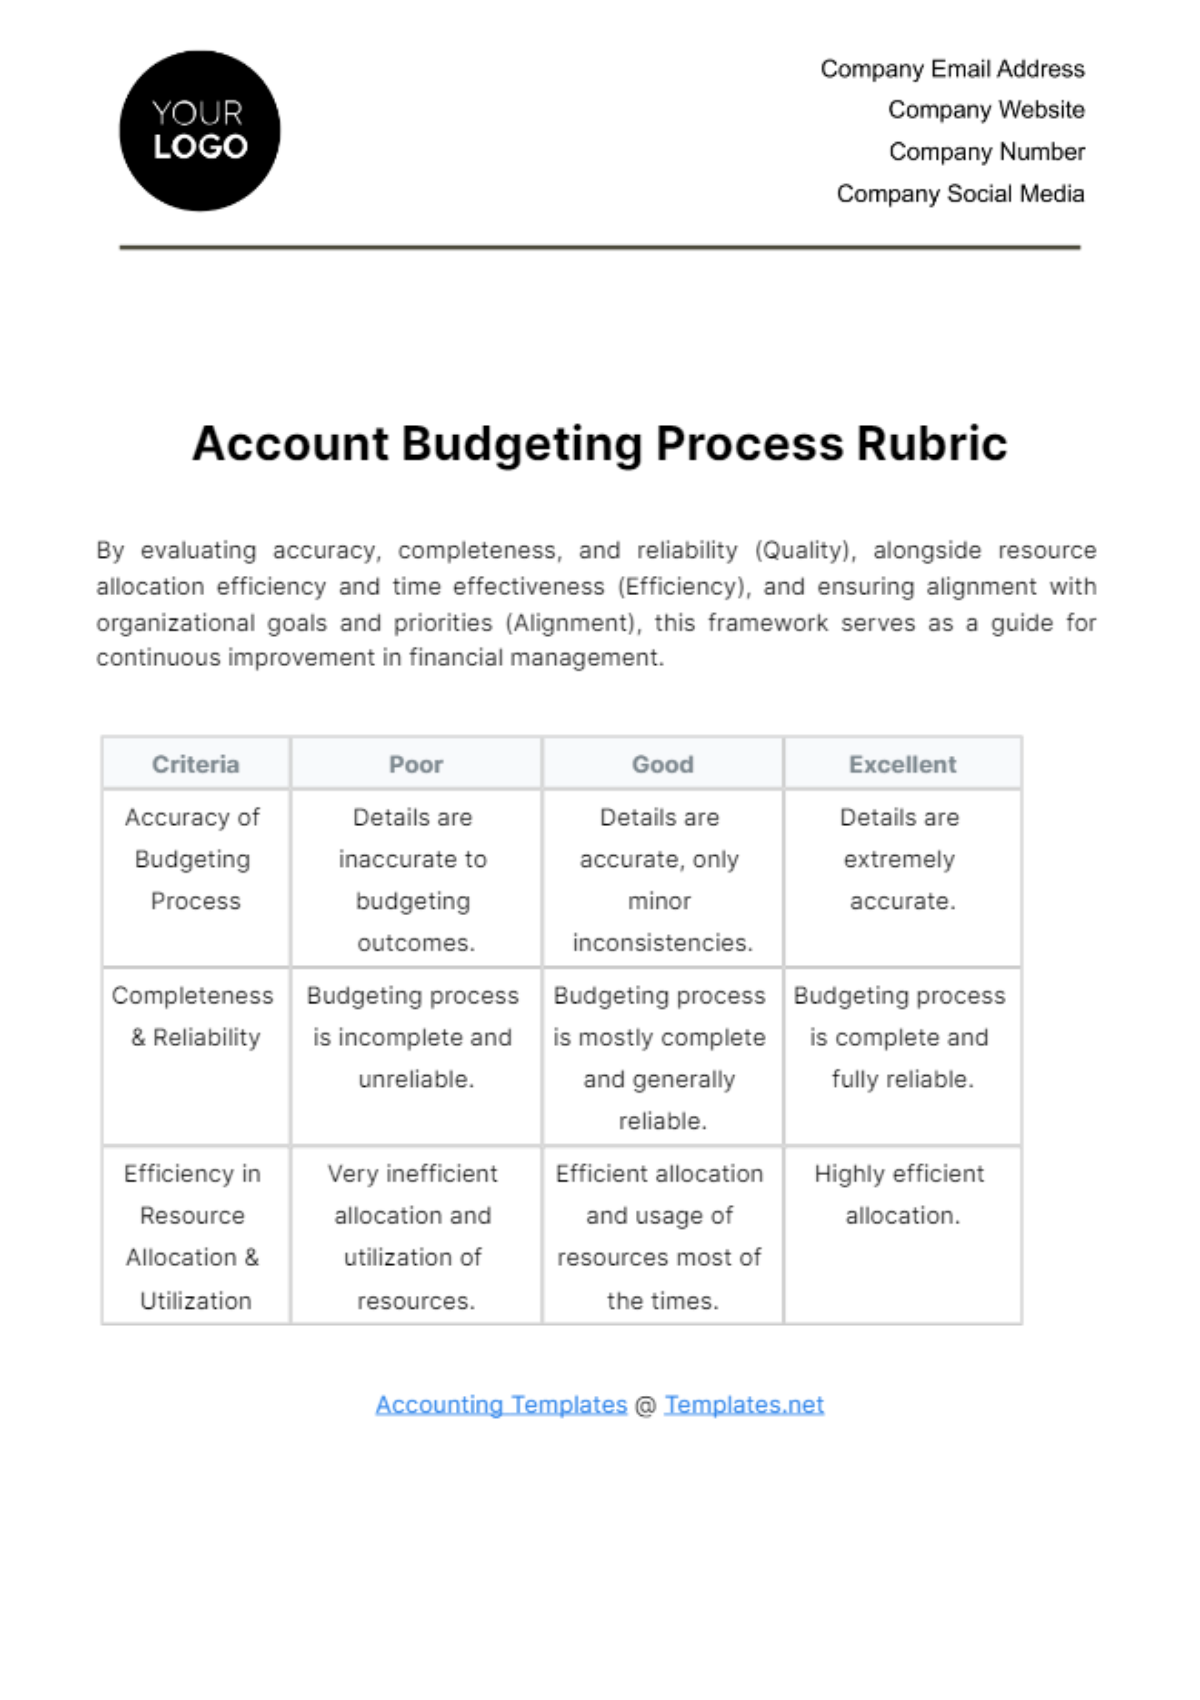 Account Budgeting Process Rubric Template